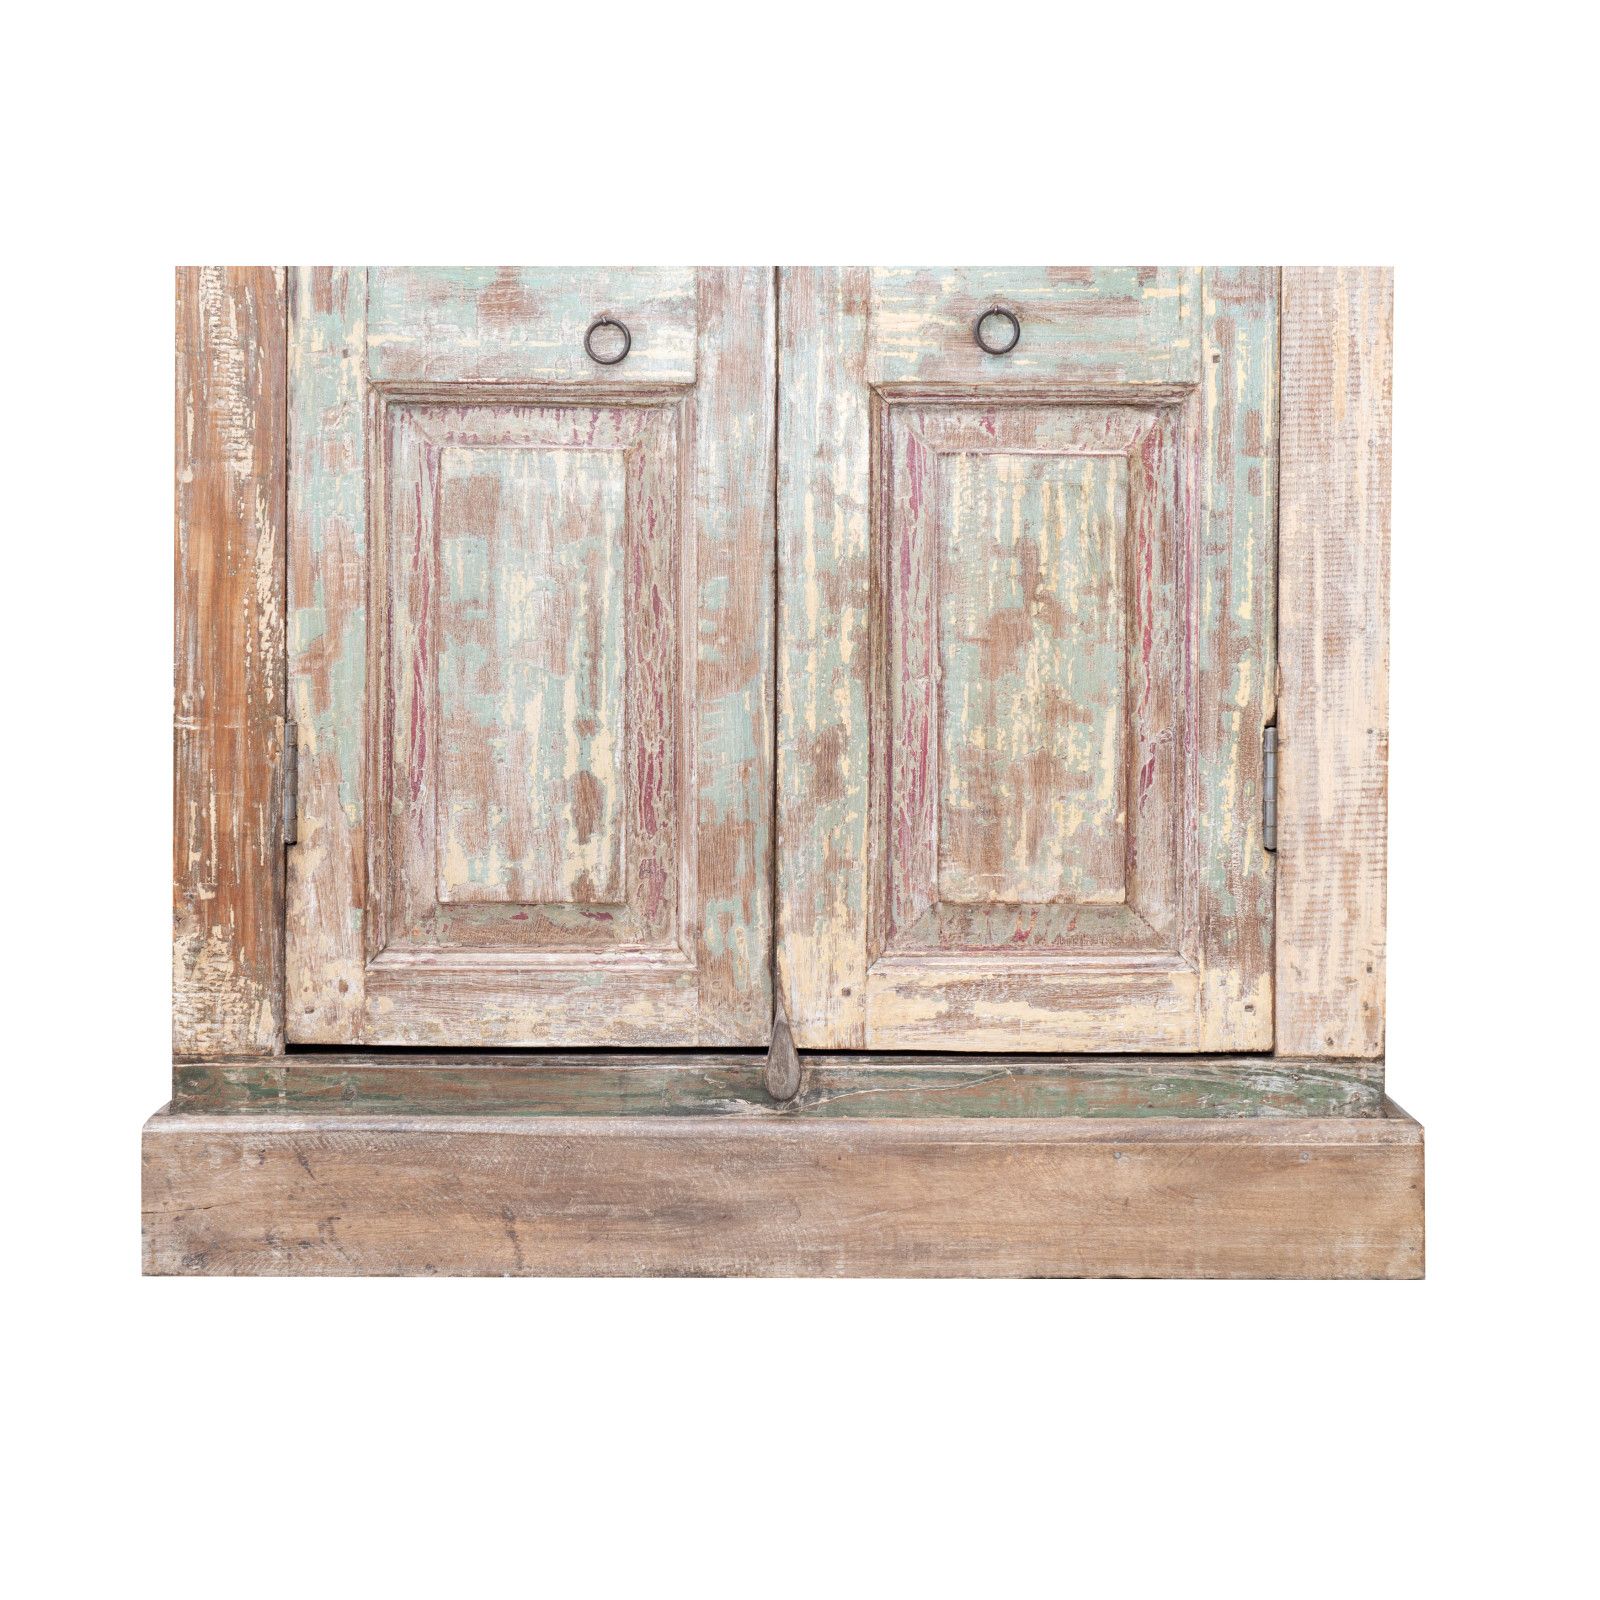 Well Known Antique Storage Sideboards With Doors Pertaining To Biscottini International Art Trading (View 8 of 10)